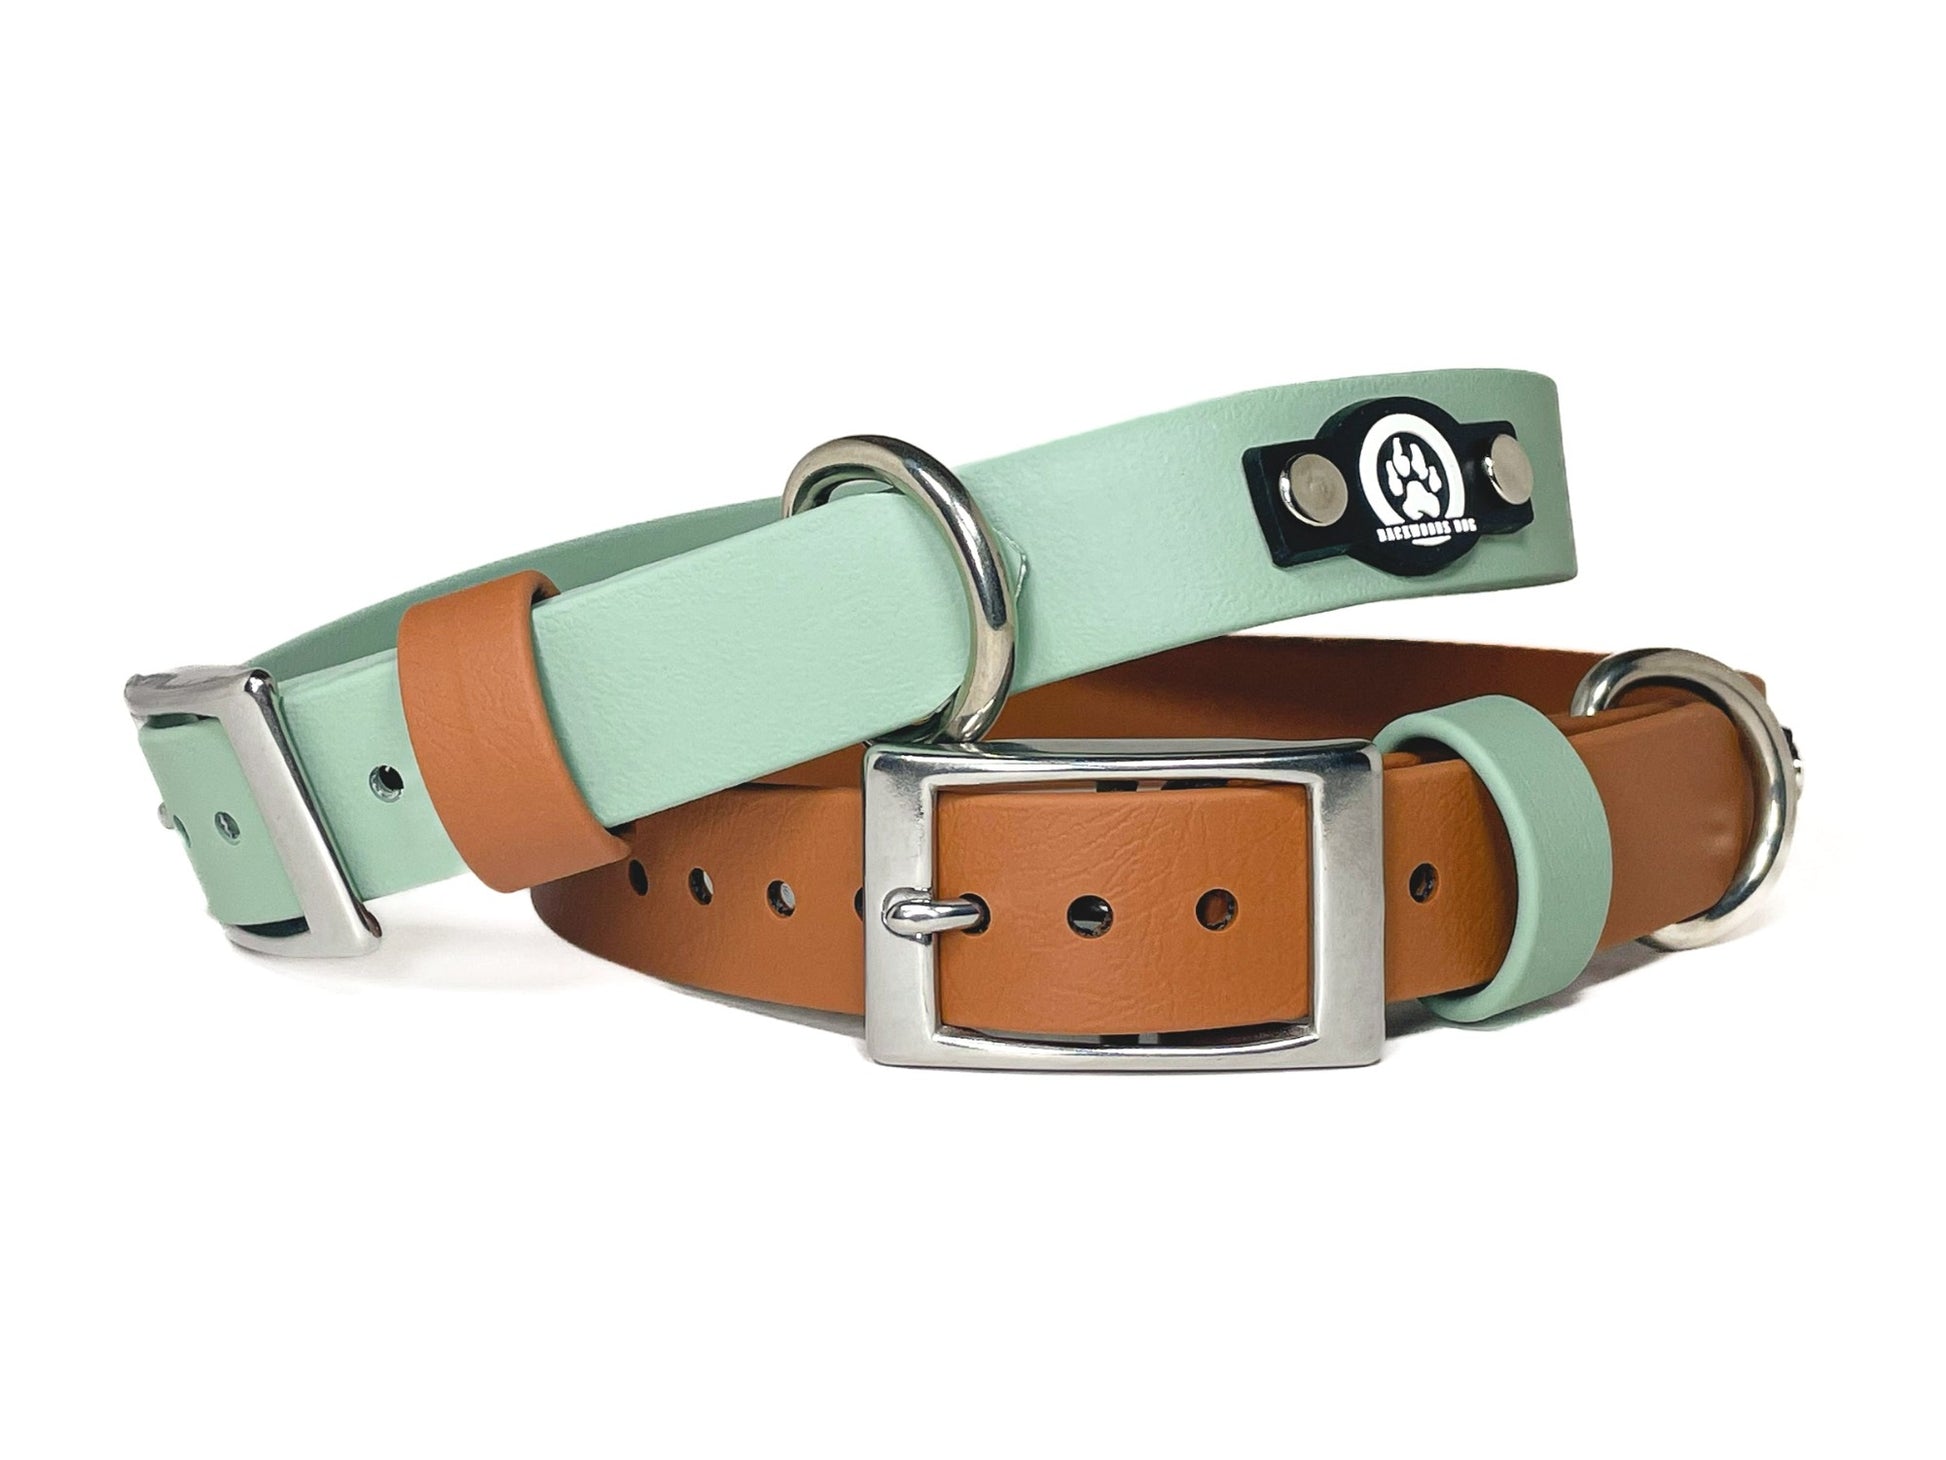 Backwoods Dog waterproof BioThane stainless buckle dog collar in sage and cognac